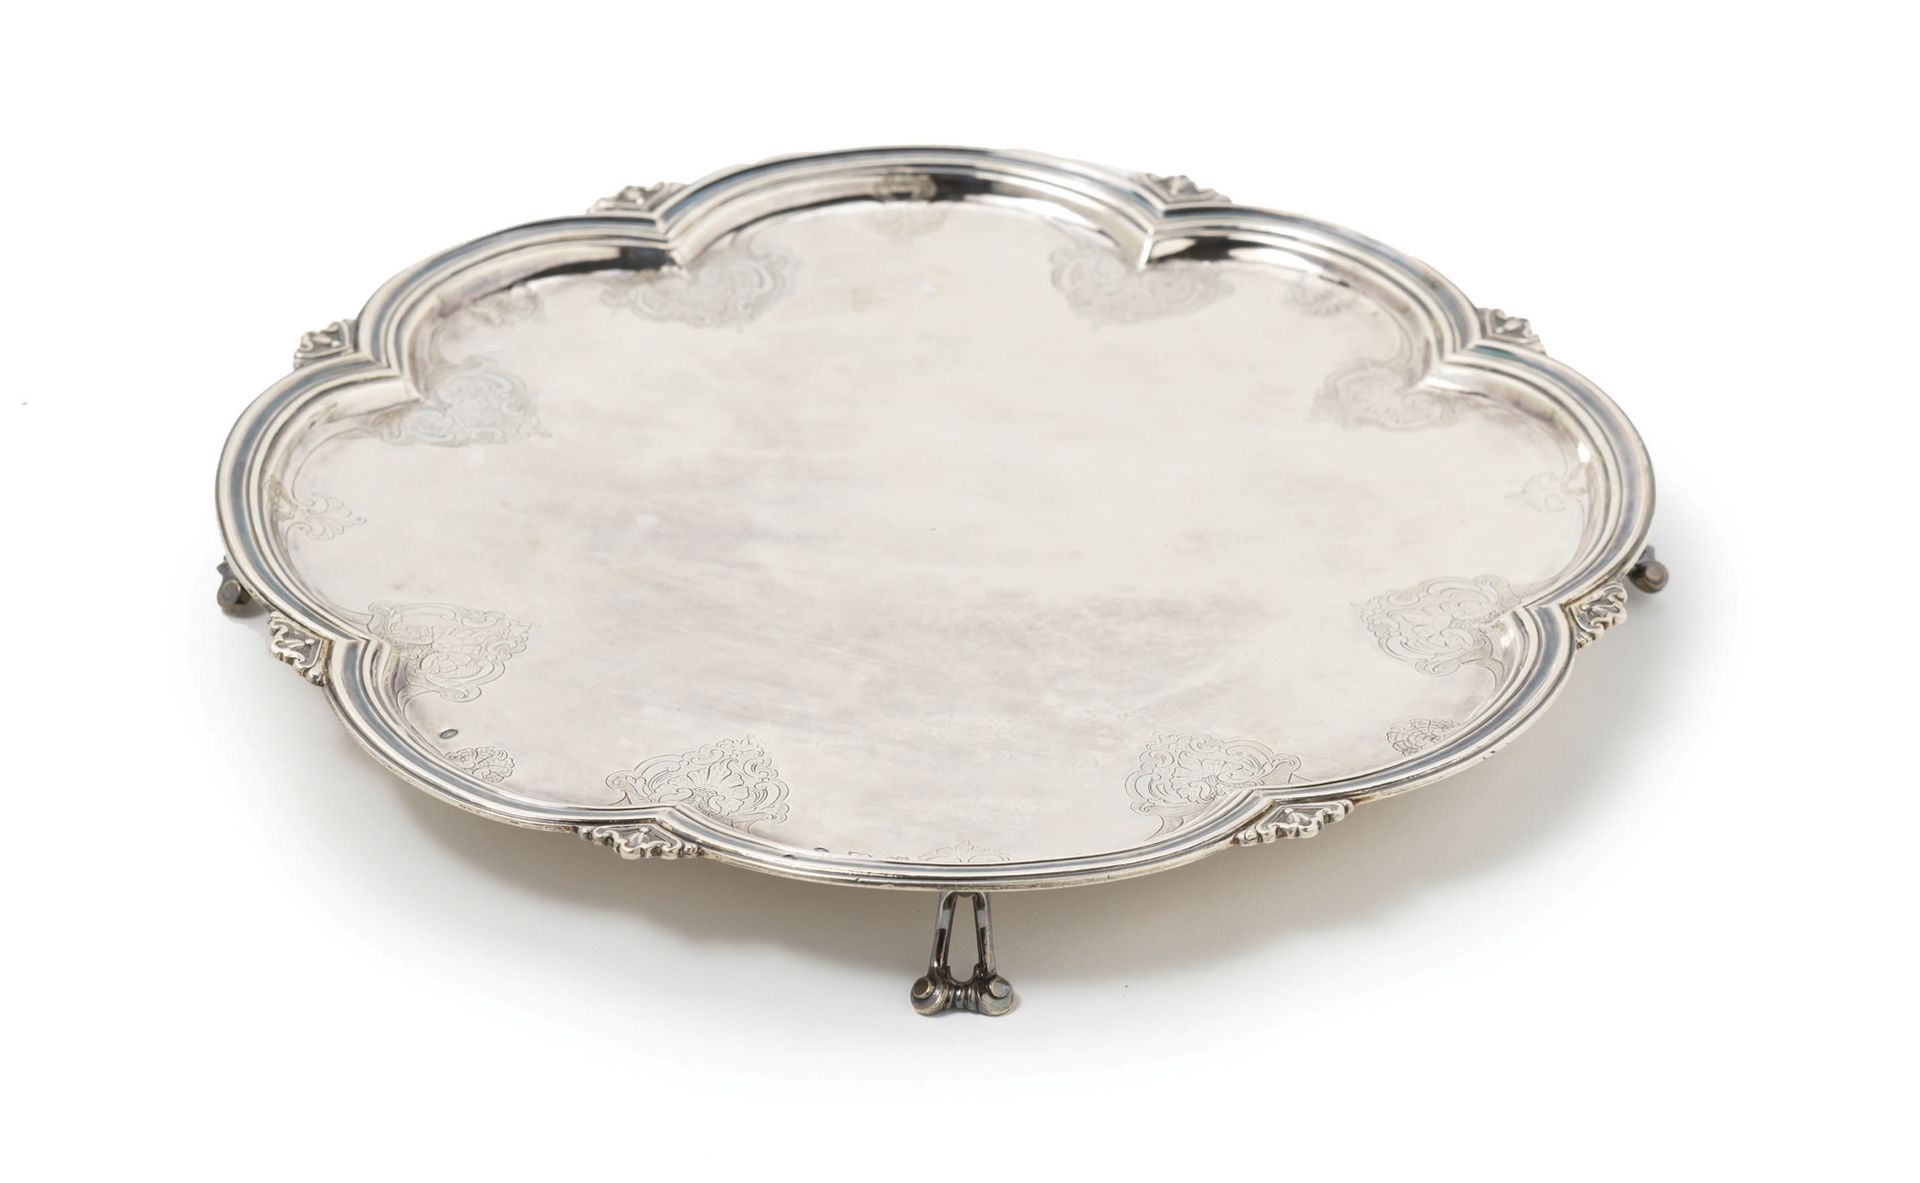 Null SILVER FLYING PLATE Lier, 1755
Date stamp : 55, Master silversmith : IDK, a&hellip;